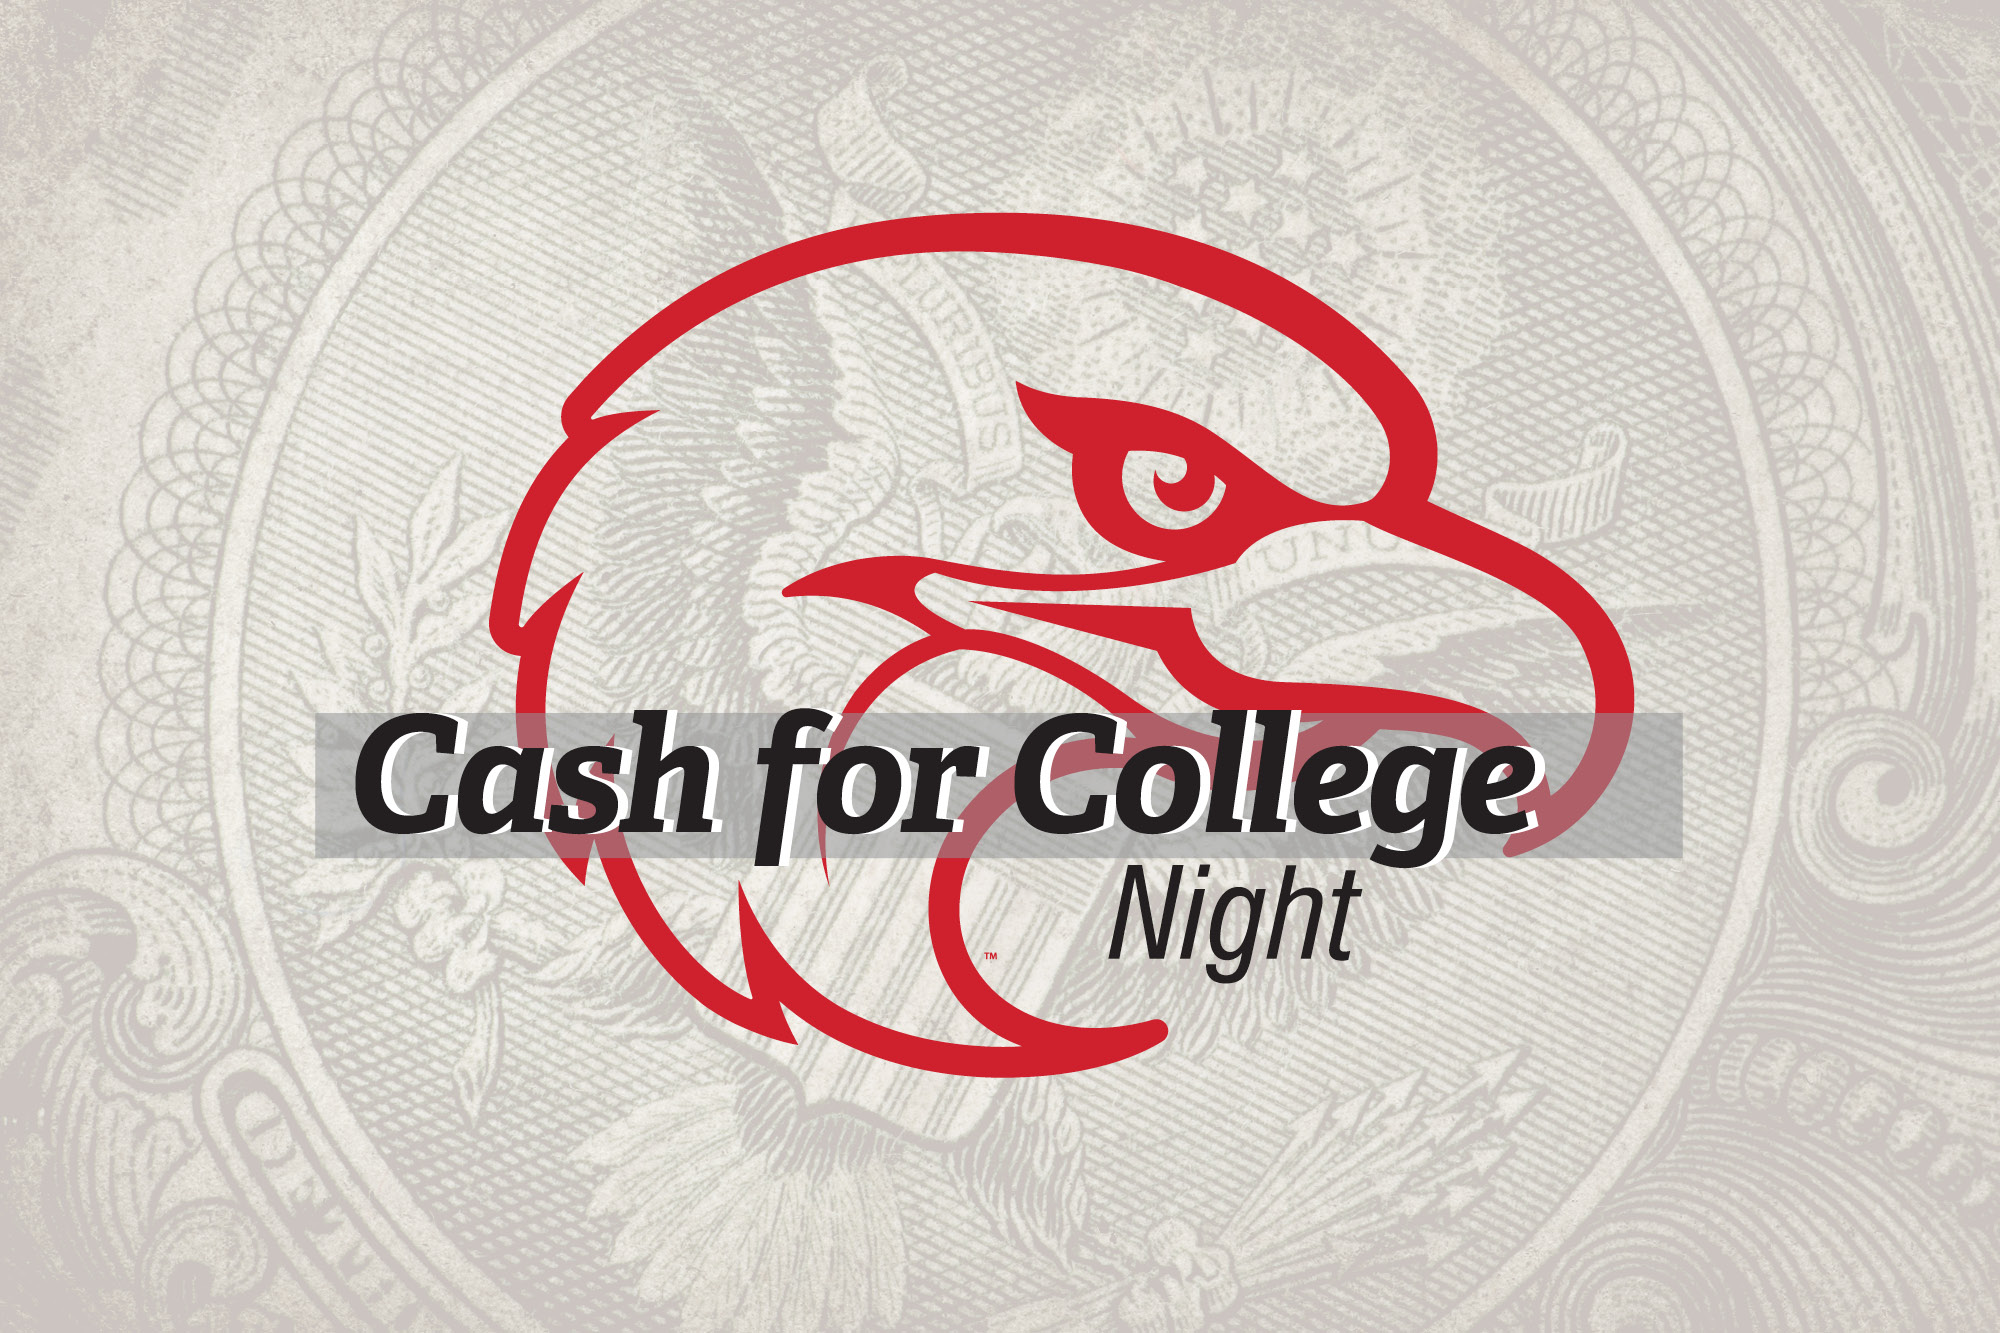 Thumderbird logo in the background with the words: "Cash for College Night."